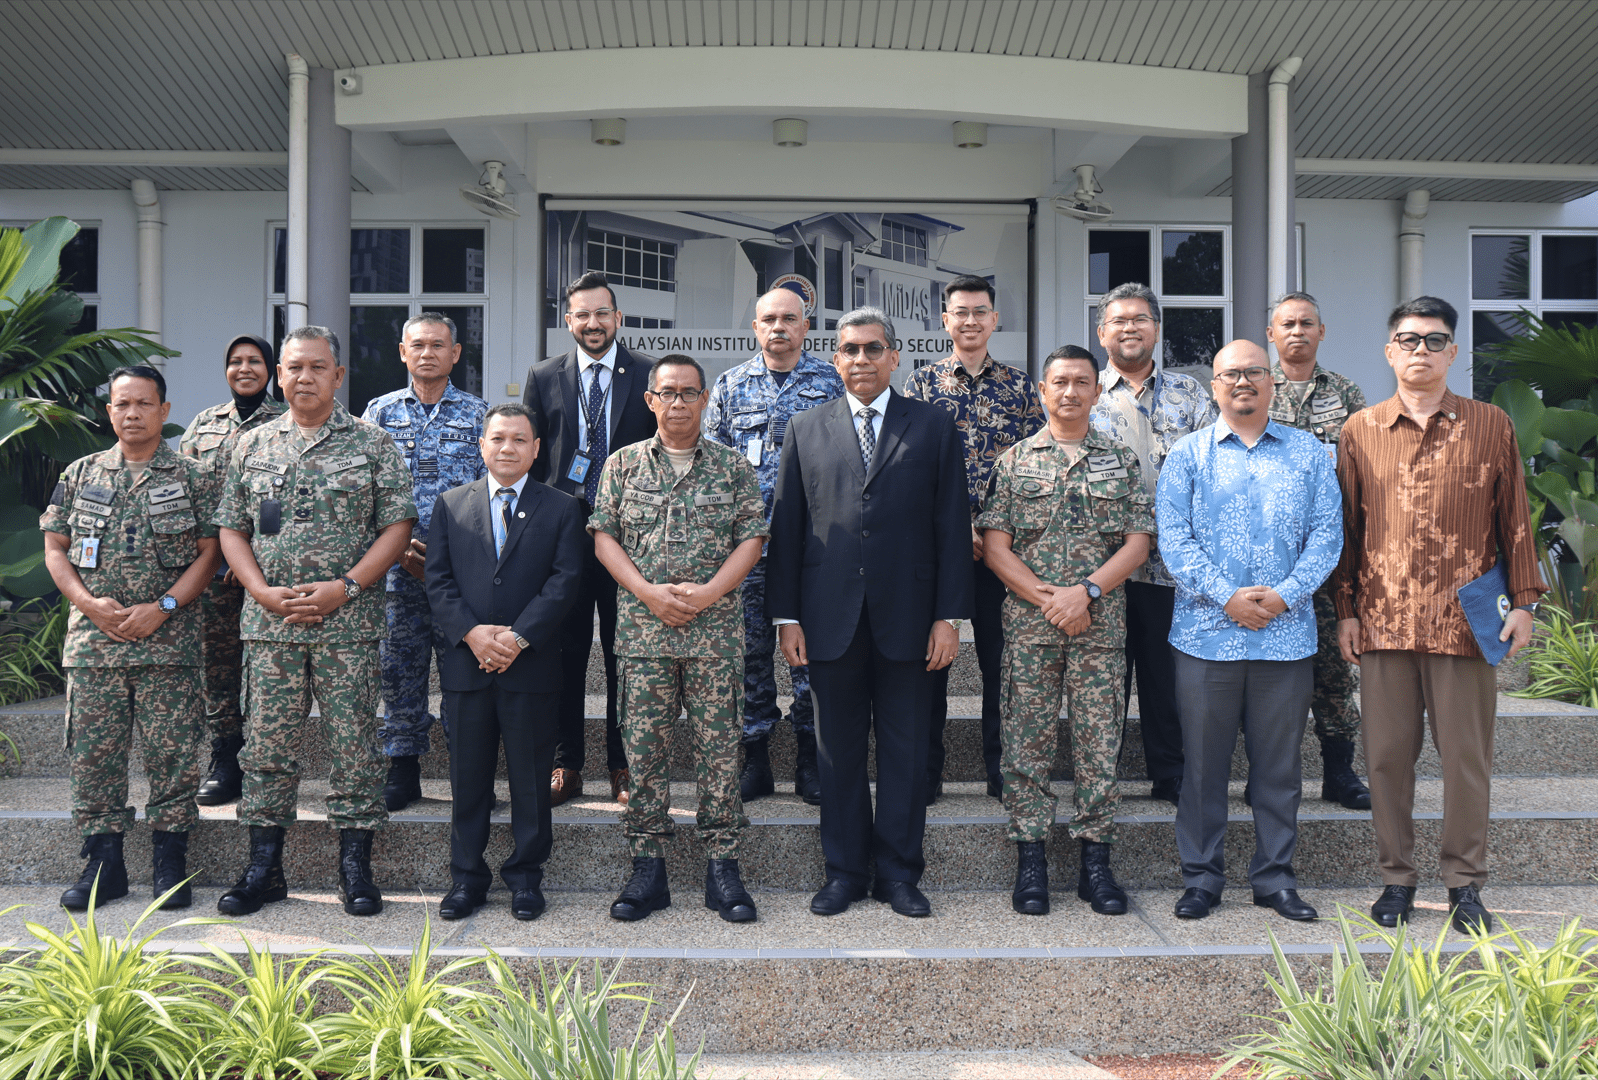 COURTESY VISIT TO MALAYSIAN INSTITUTE OF DEFENCE AND SECURITY (MiDAS).